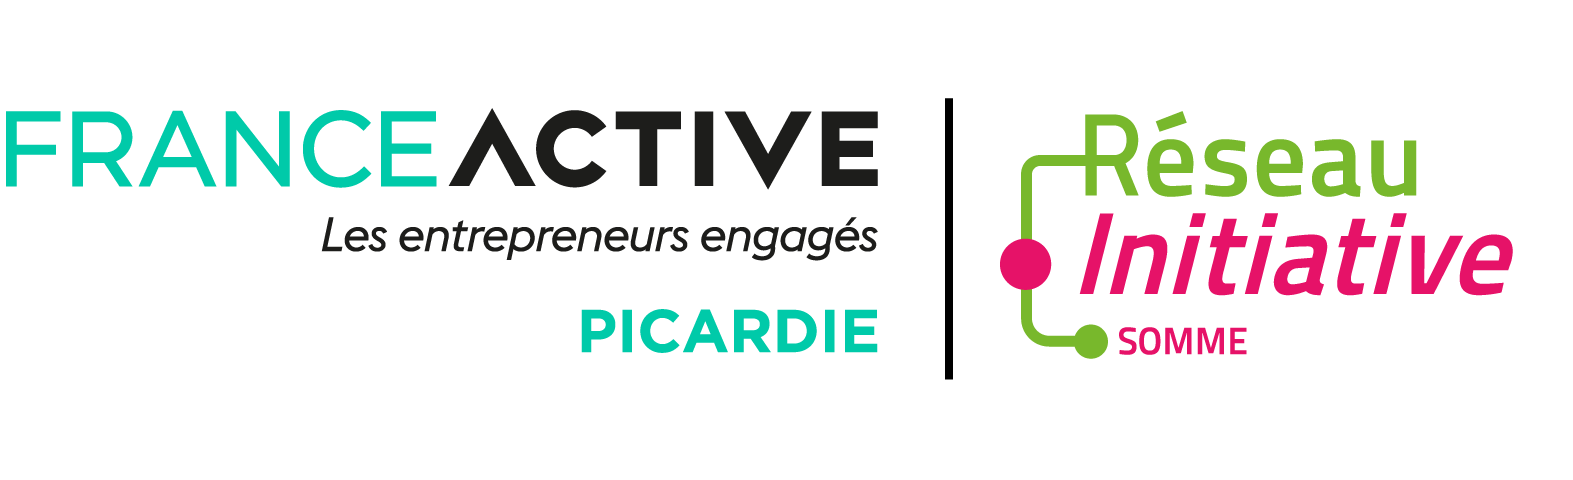 Initiative Somme France Active Picardie